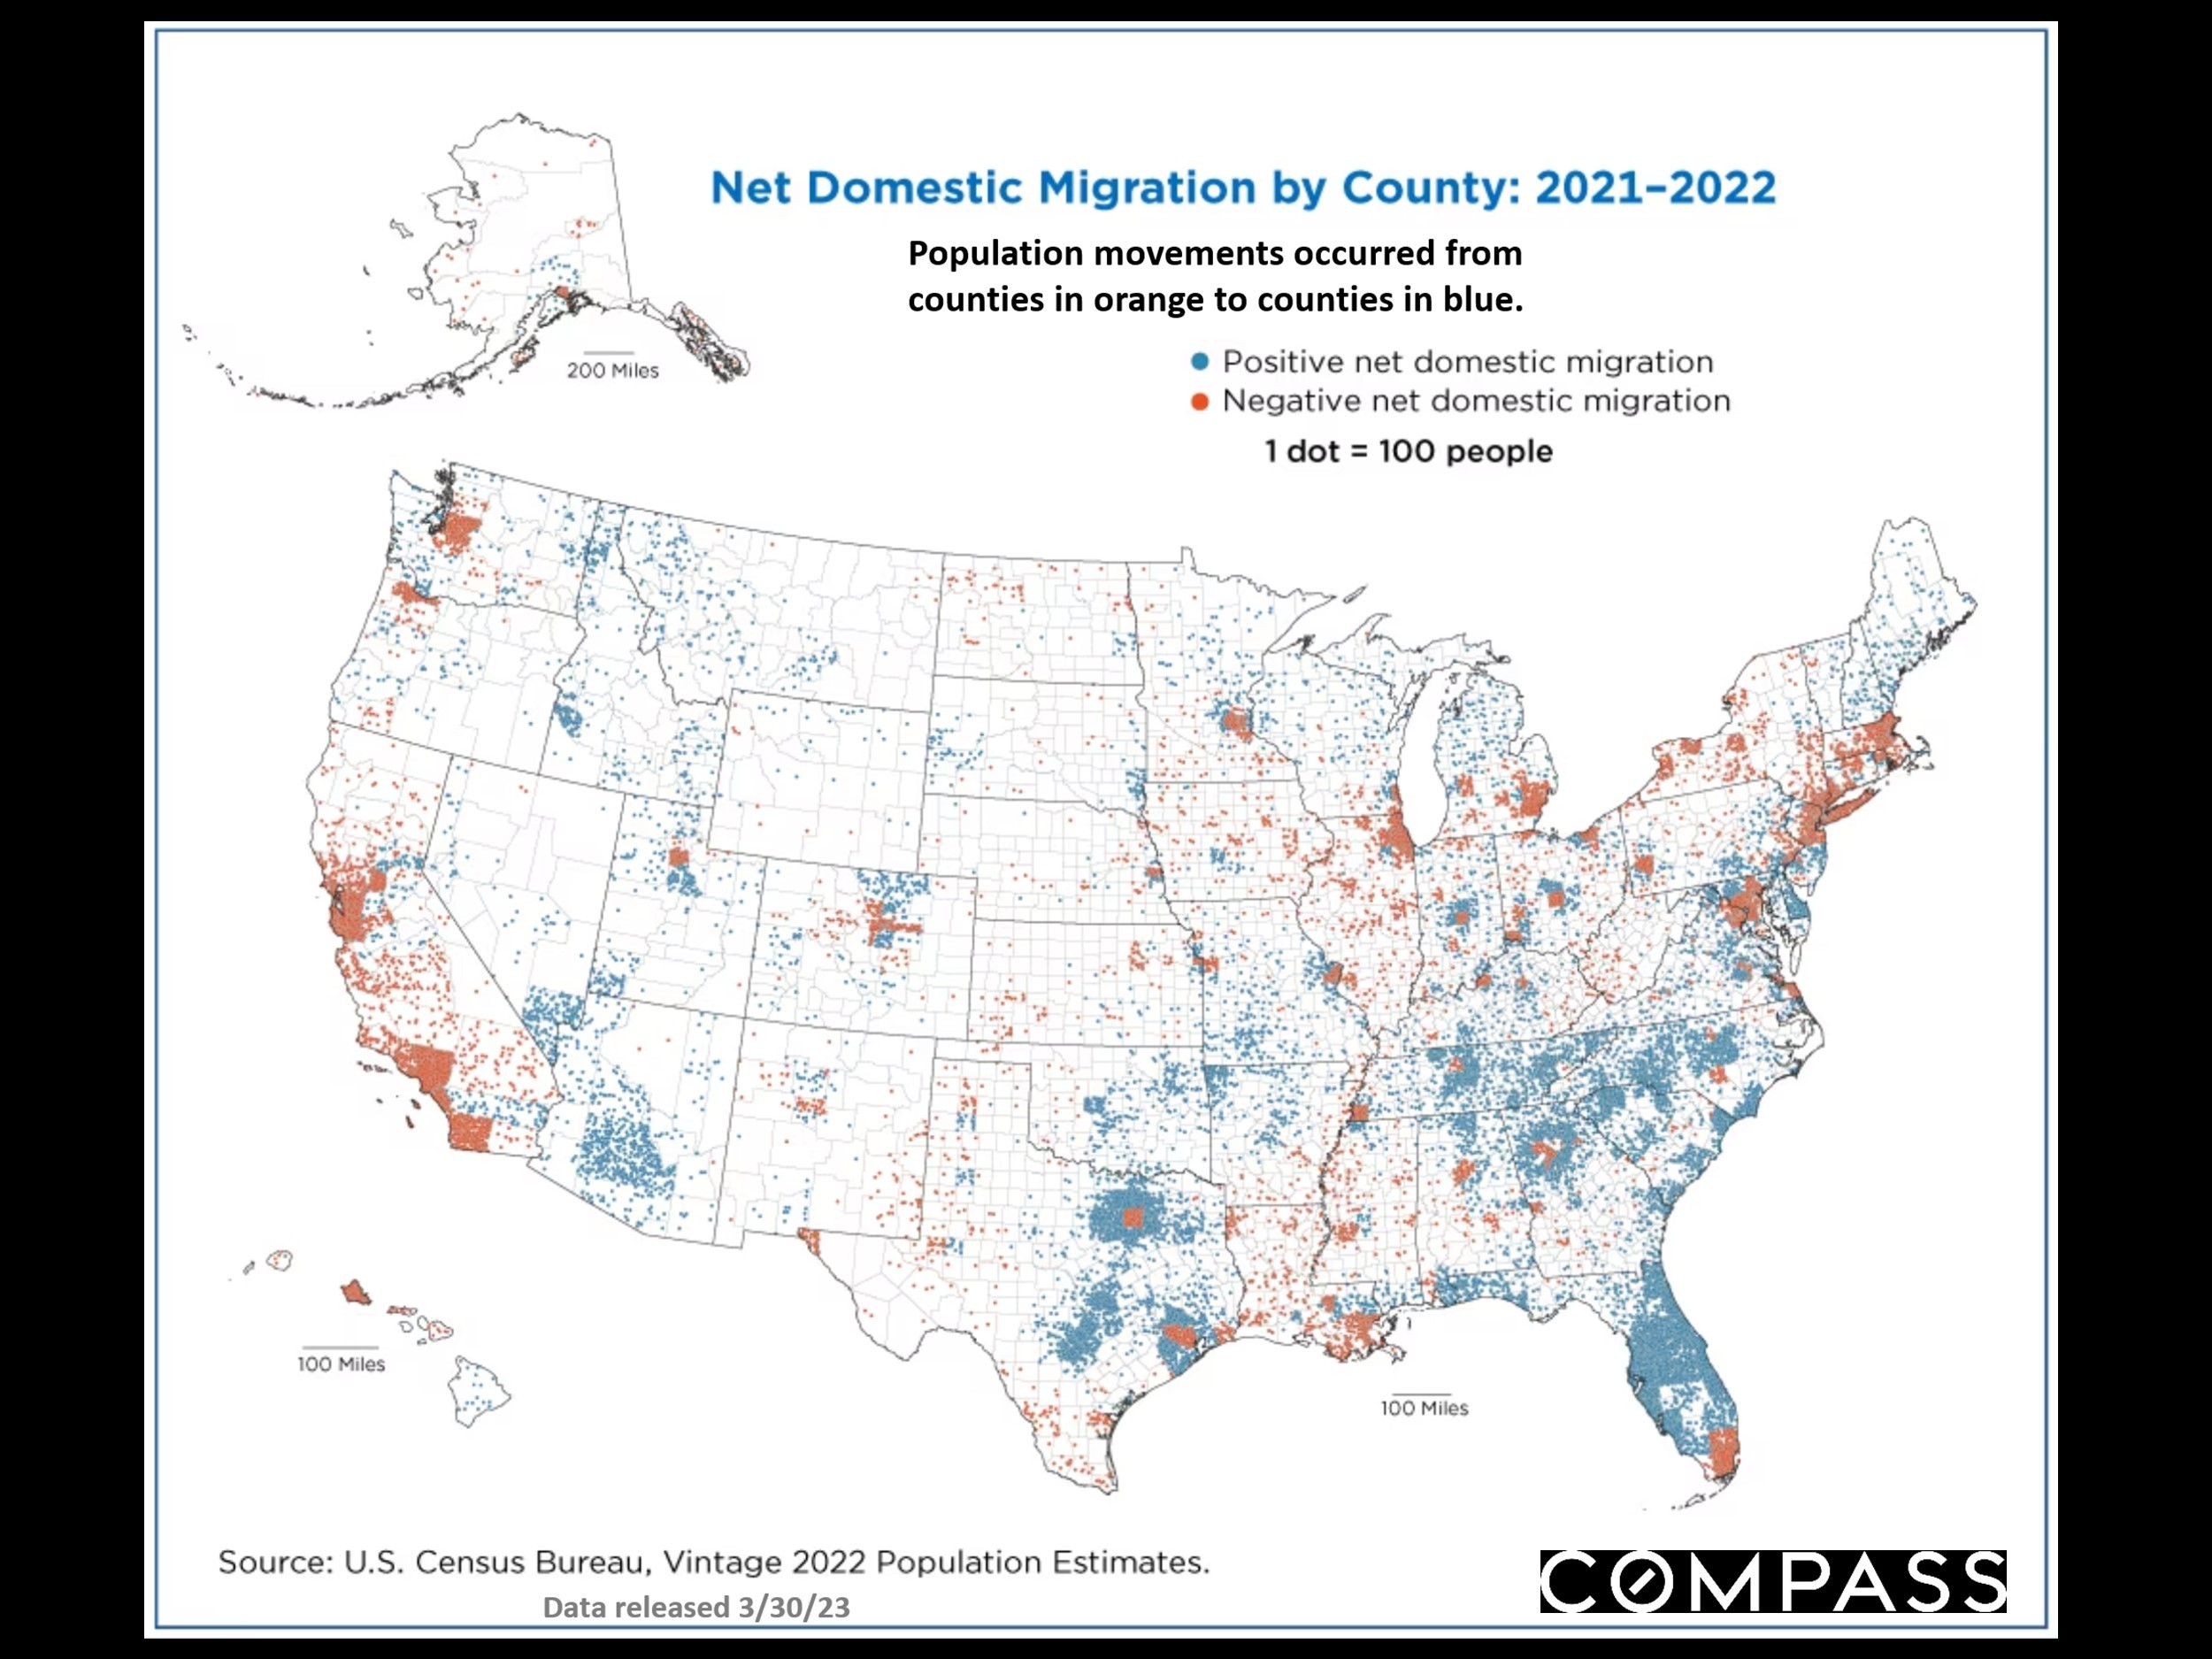 Net Domestic Migration by County: 2021-2022